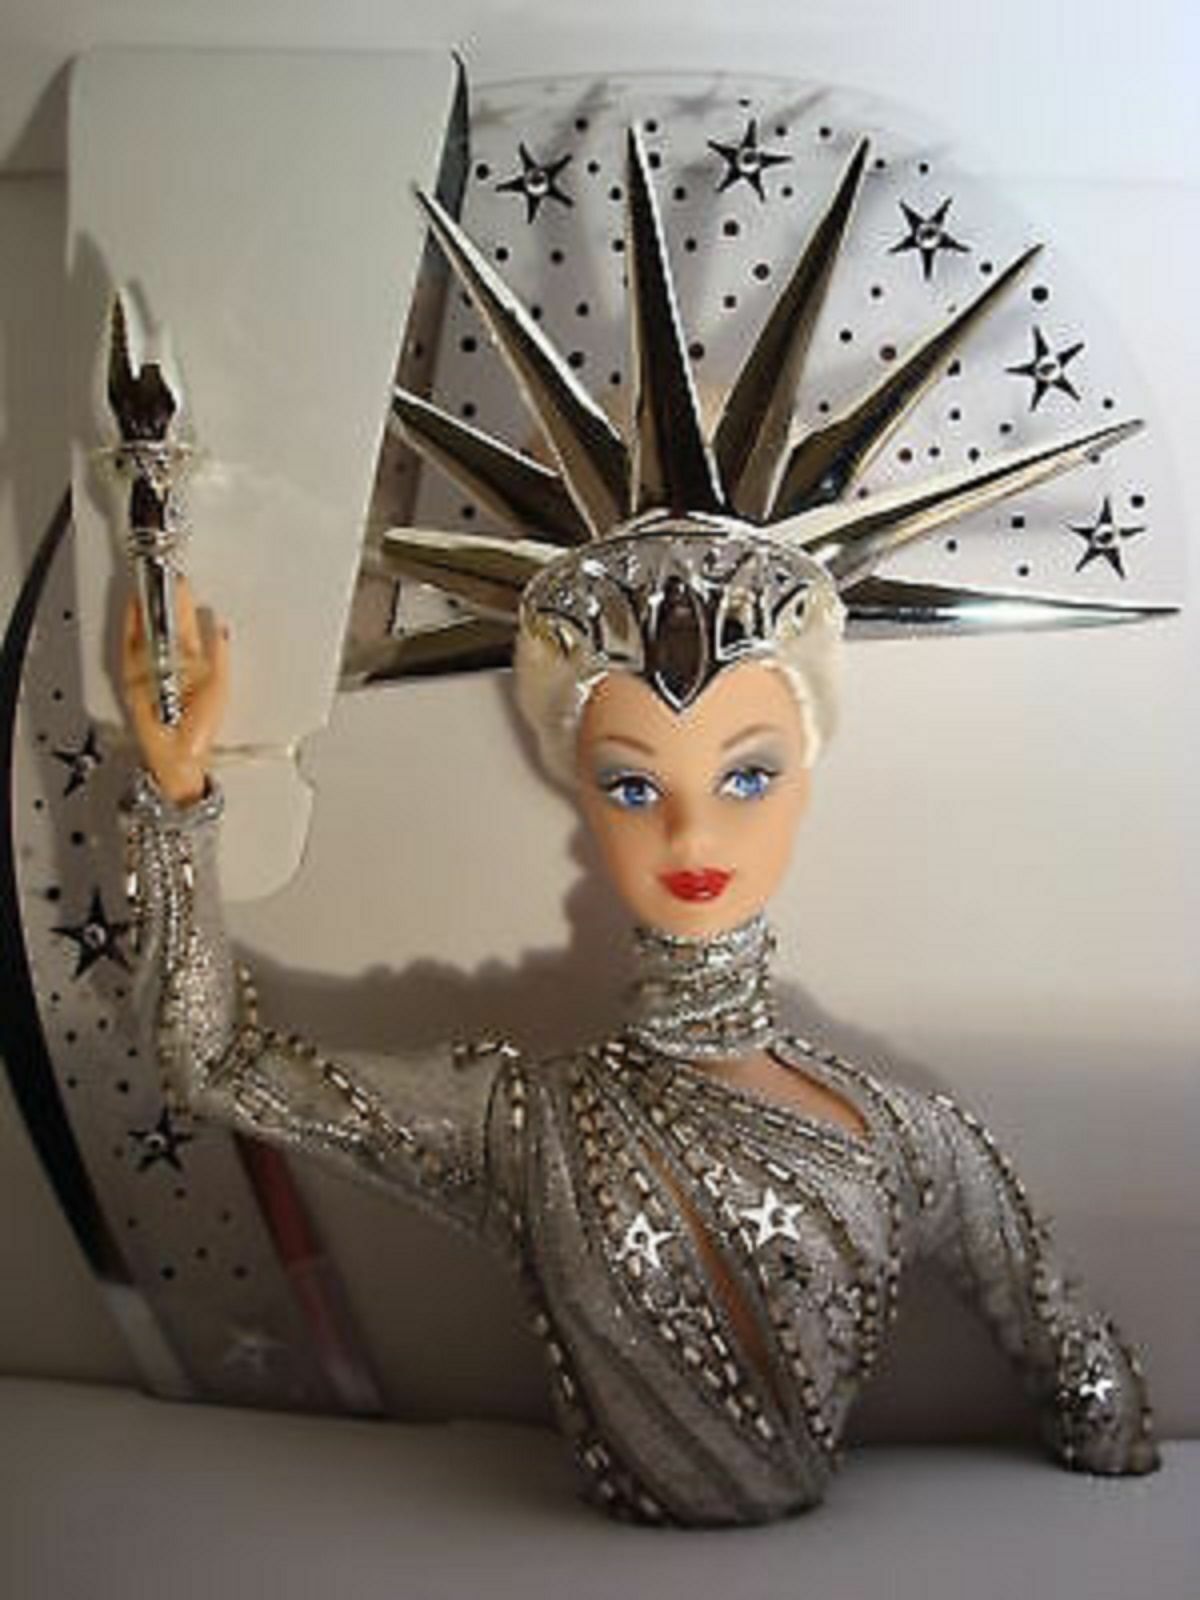 Primary image for BARBIE LADY LIBERTY, BILLIONS OF DREAMS MINT MEMORIES, MOON GODDESS 